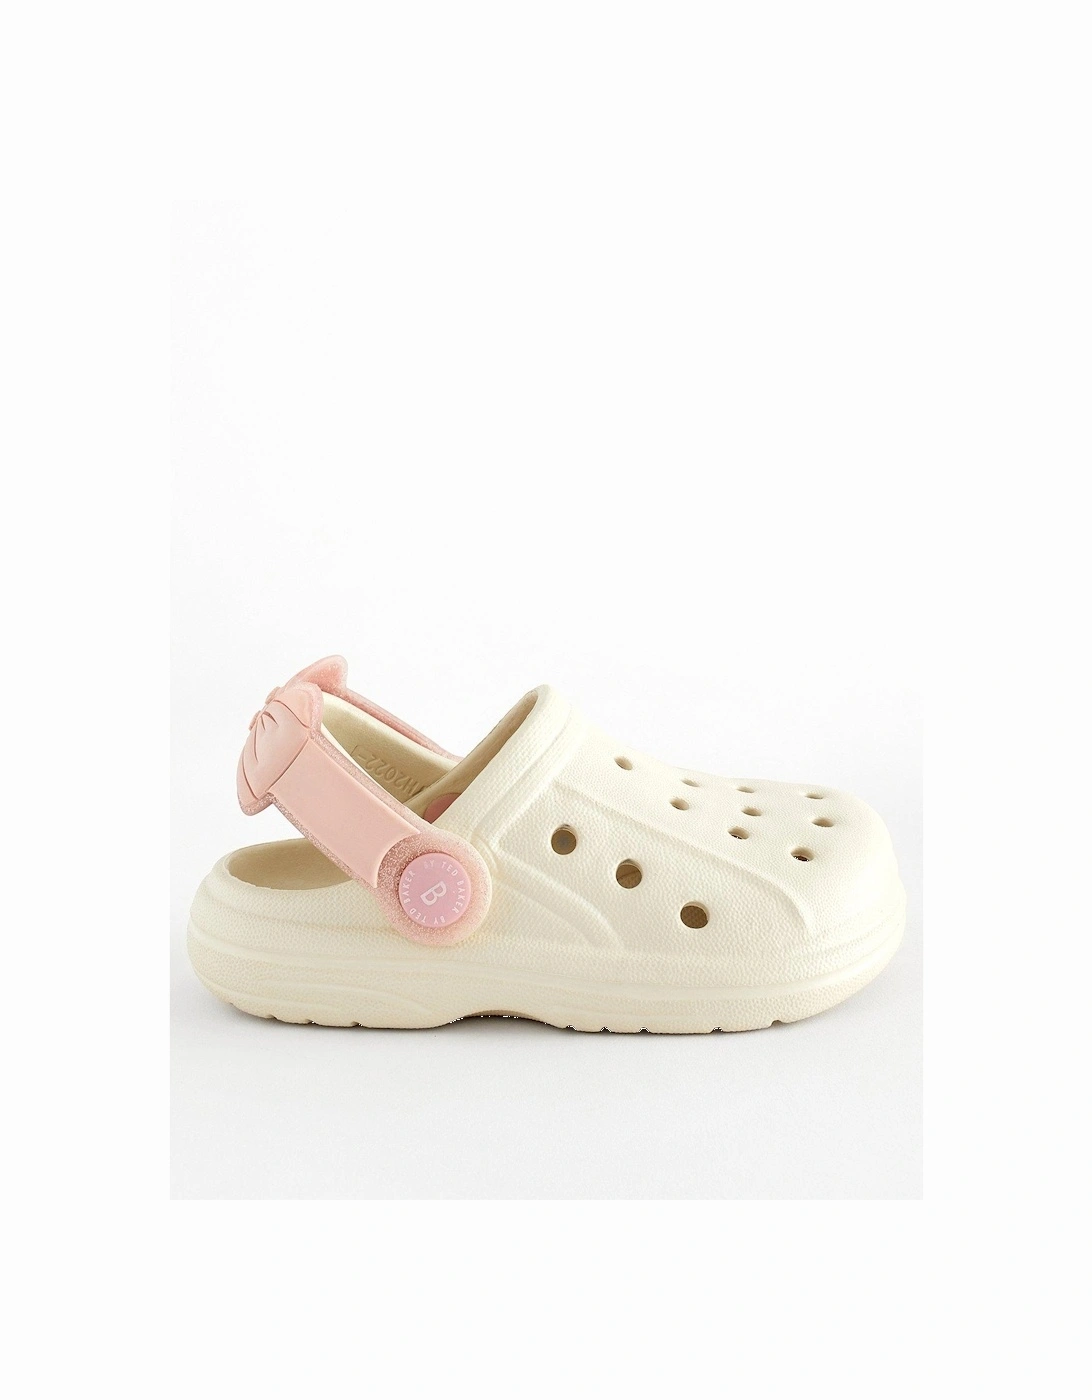 Younger Girls Bow Clog - Pink/Neutral, 8 of 7